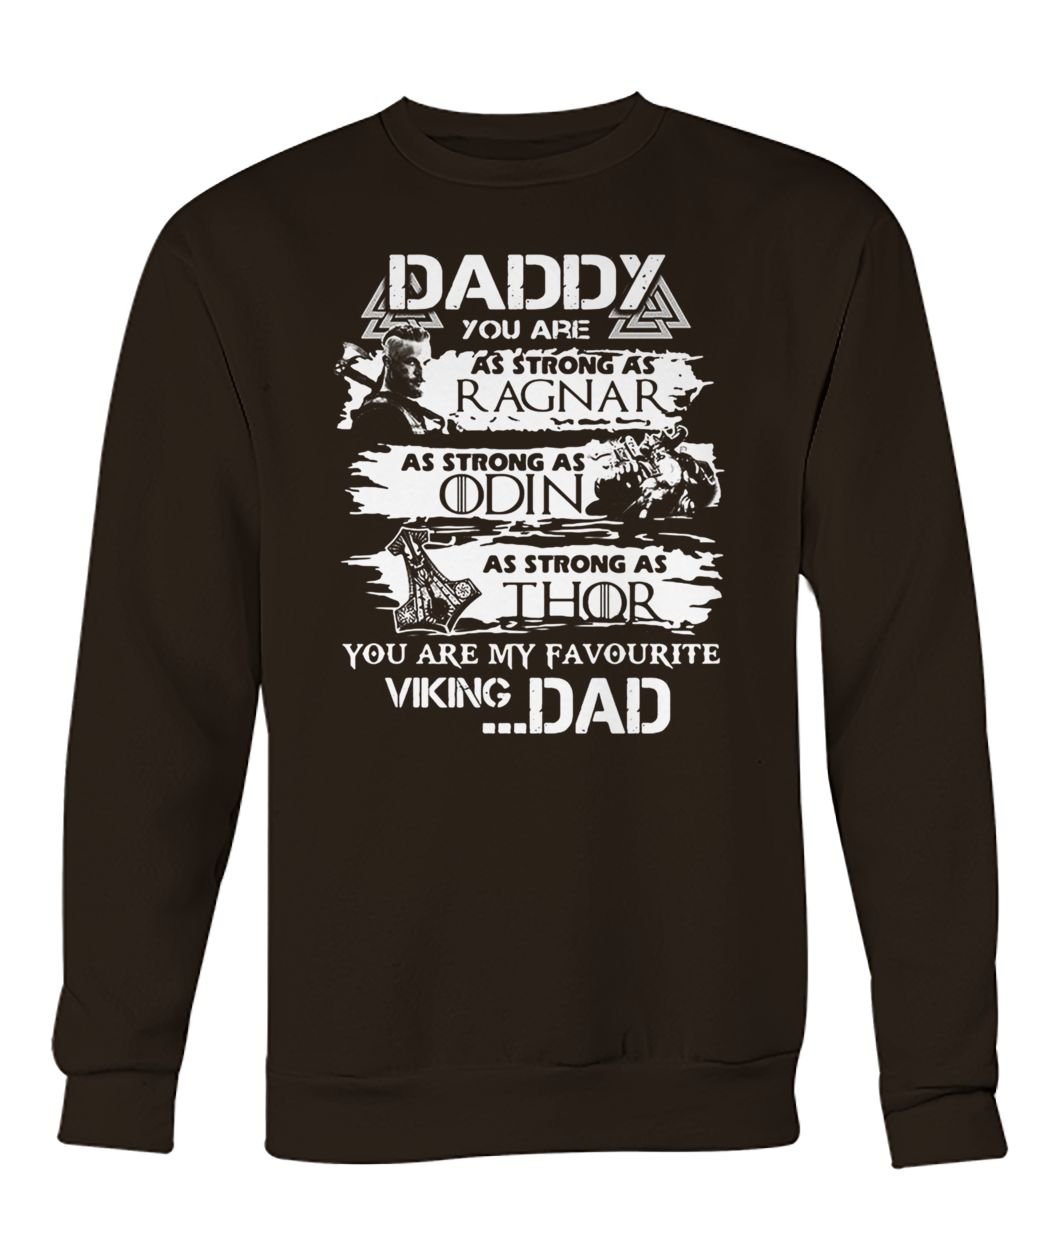 Daddy you are as brave as ragnar you are my favourite viking dad game of thrones crew neck sweatshirt